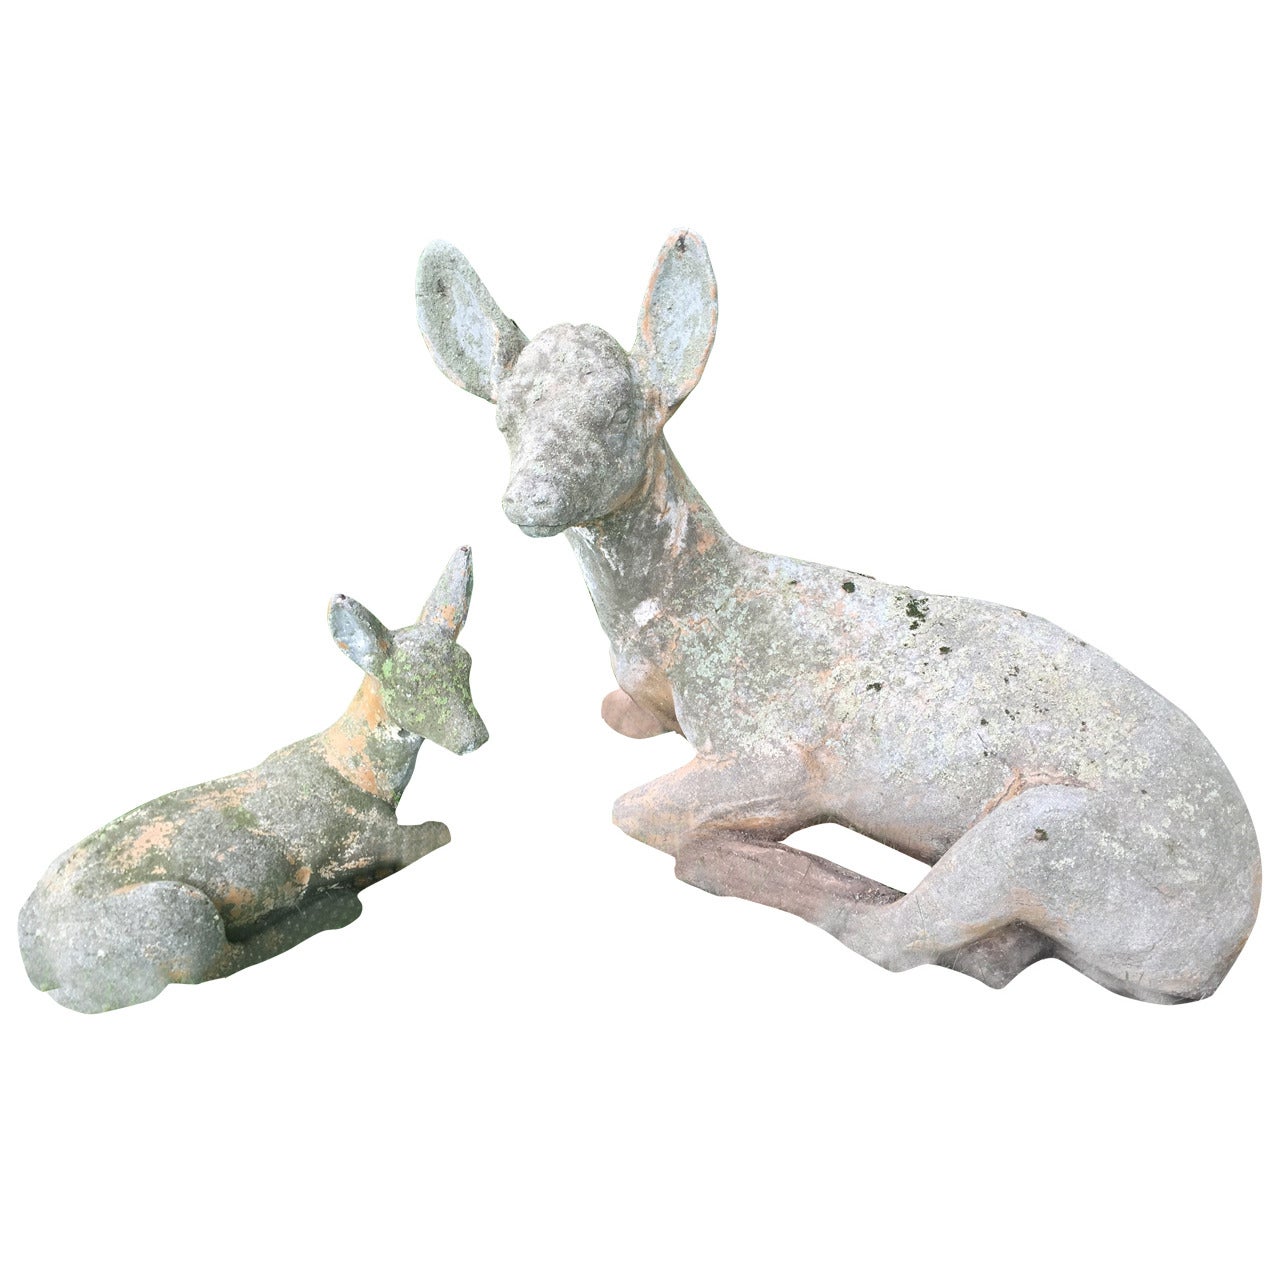 Cast Stone Figures of Recumbent Doe and Fawn